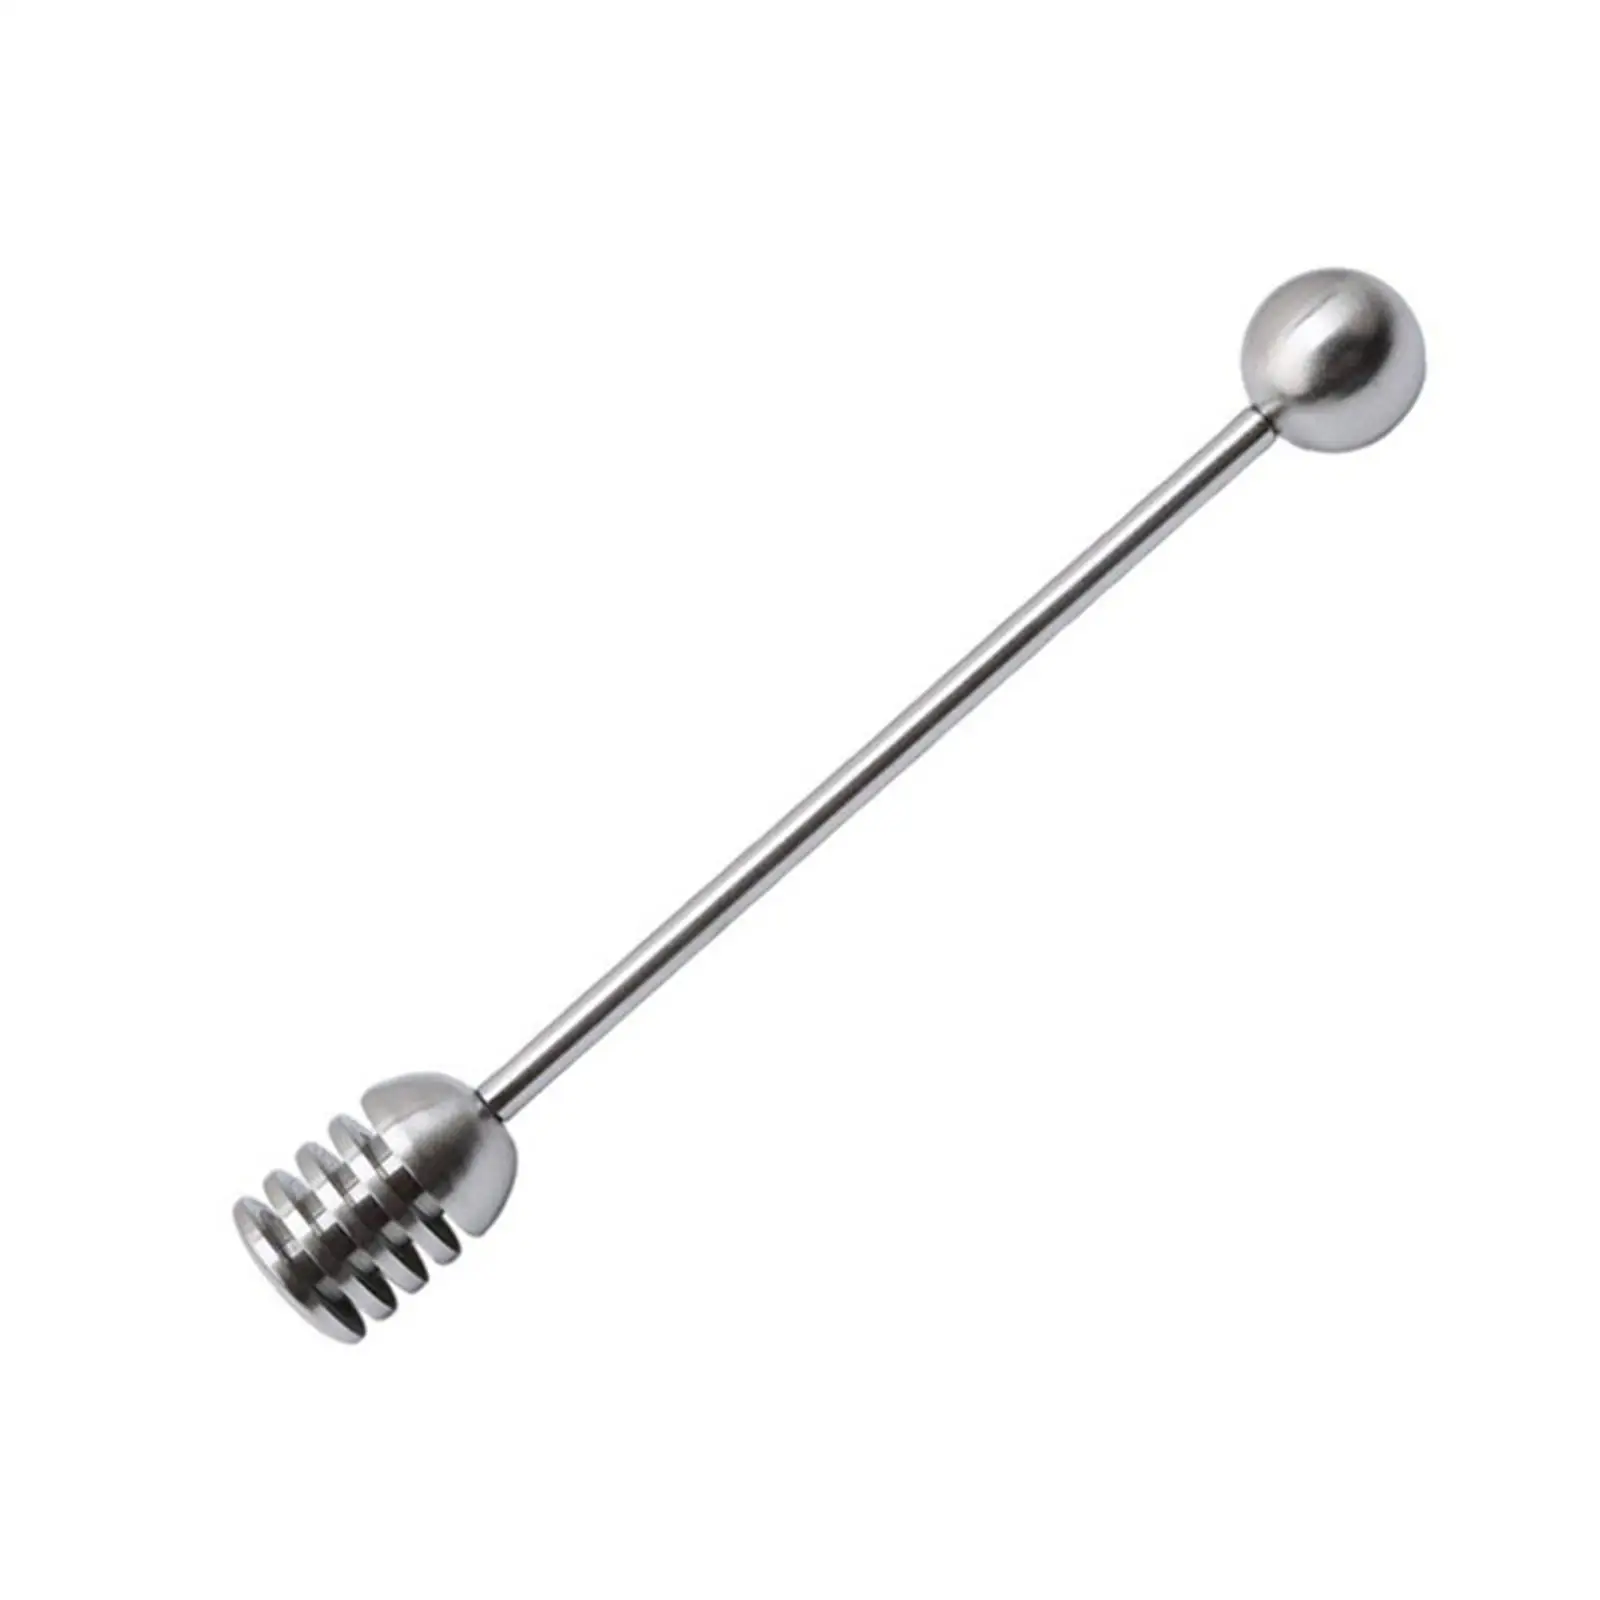 Solid Stainless Steel Honey Dipper Rod kitchen Gadgets Length 16cm Wear